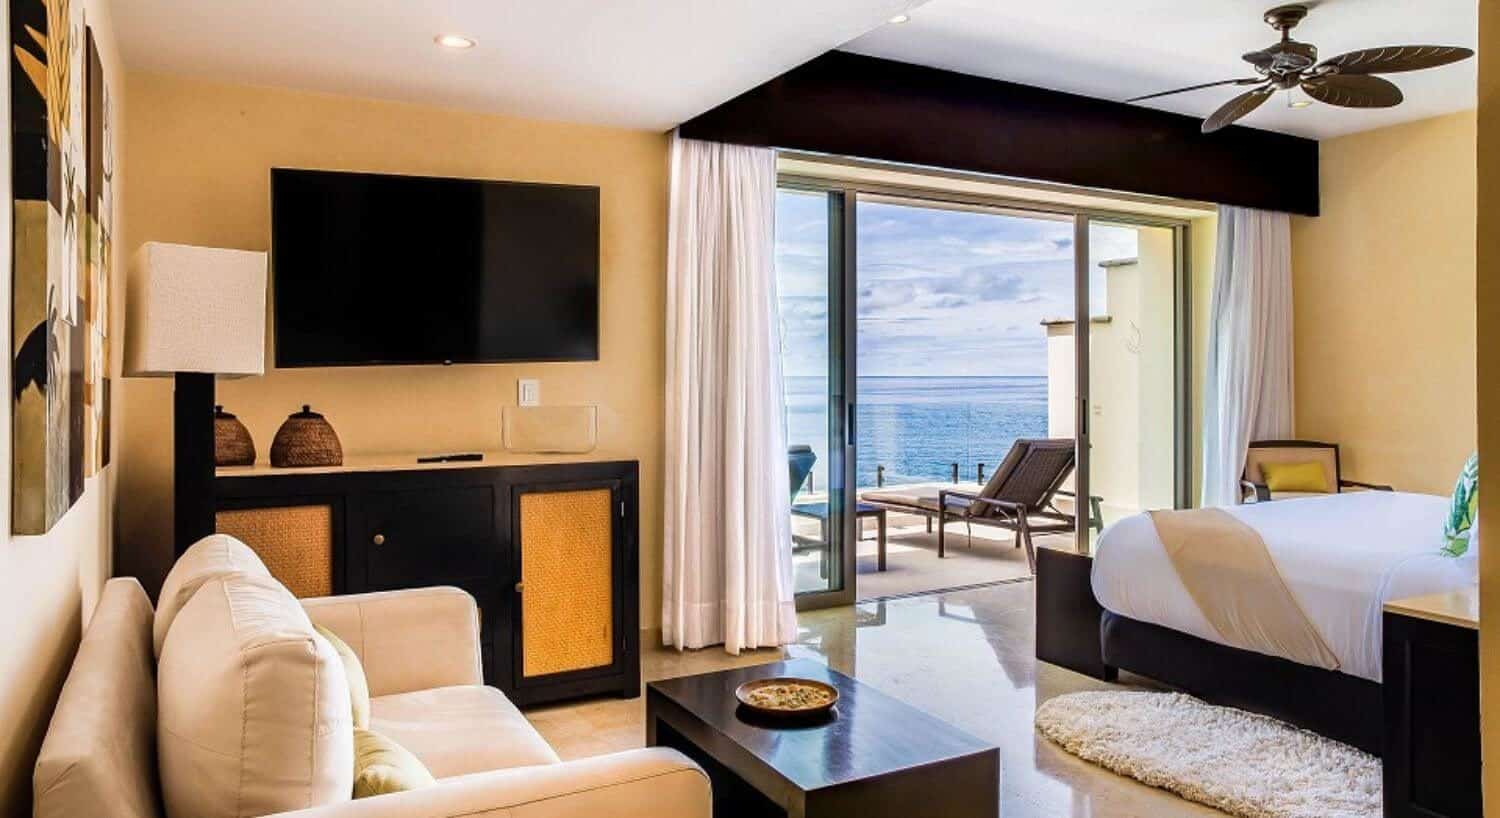 A spacious bedroom with a King bed, loveseat, flat screen TV, dresser, and sliding doors that lead to a balcony with lounge chairs, and views of the ocean.